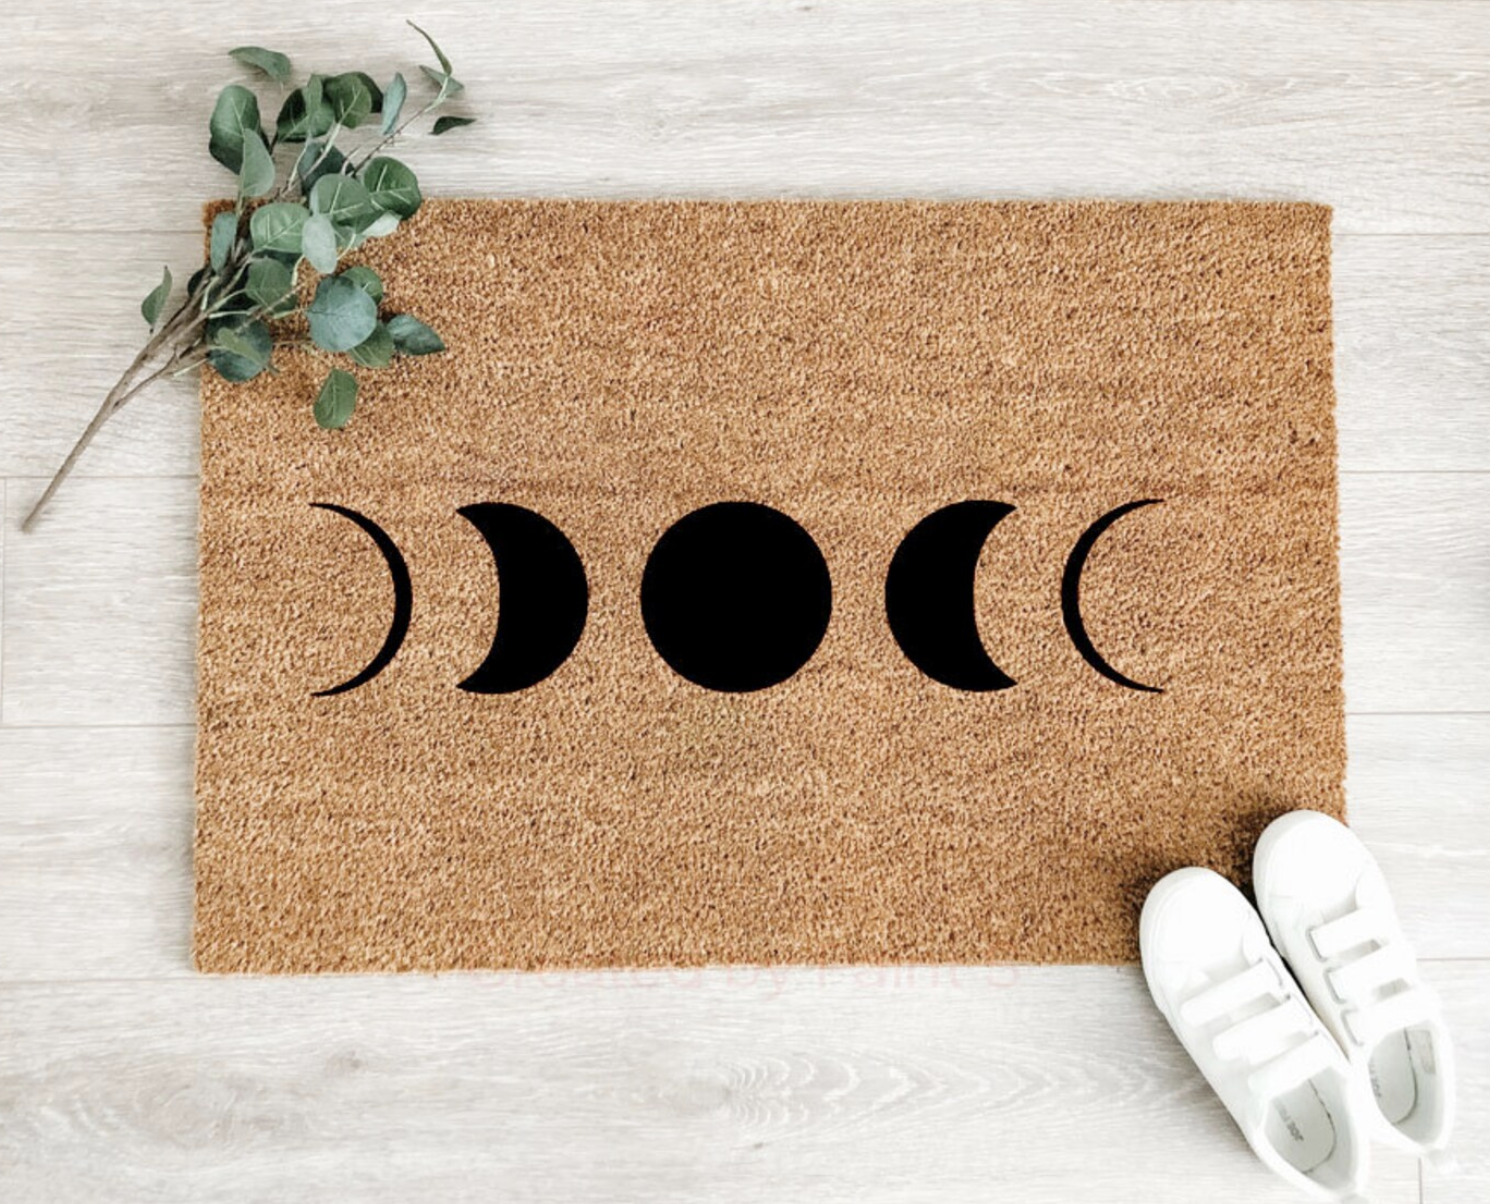 The doormat with the moon phases on the ground next to some shoes